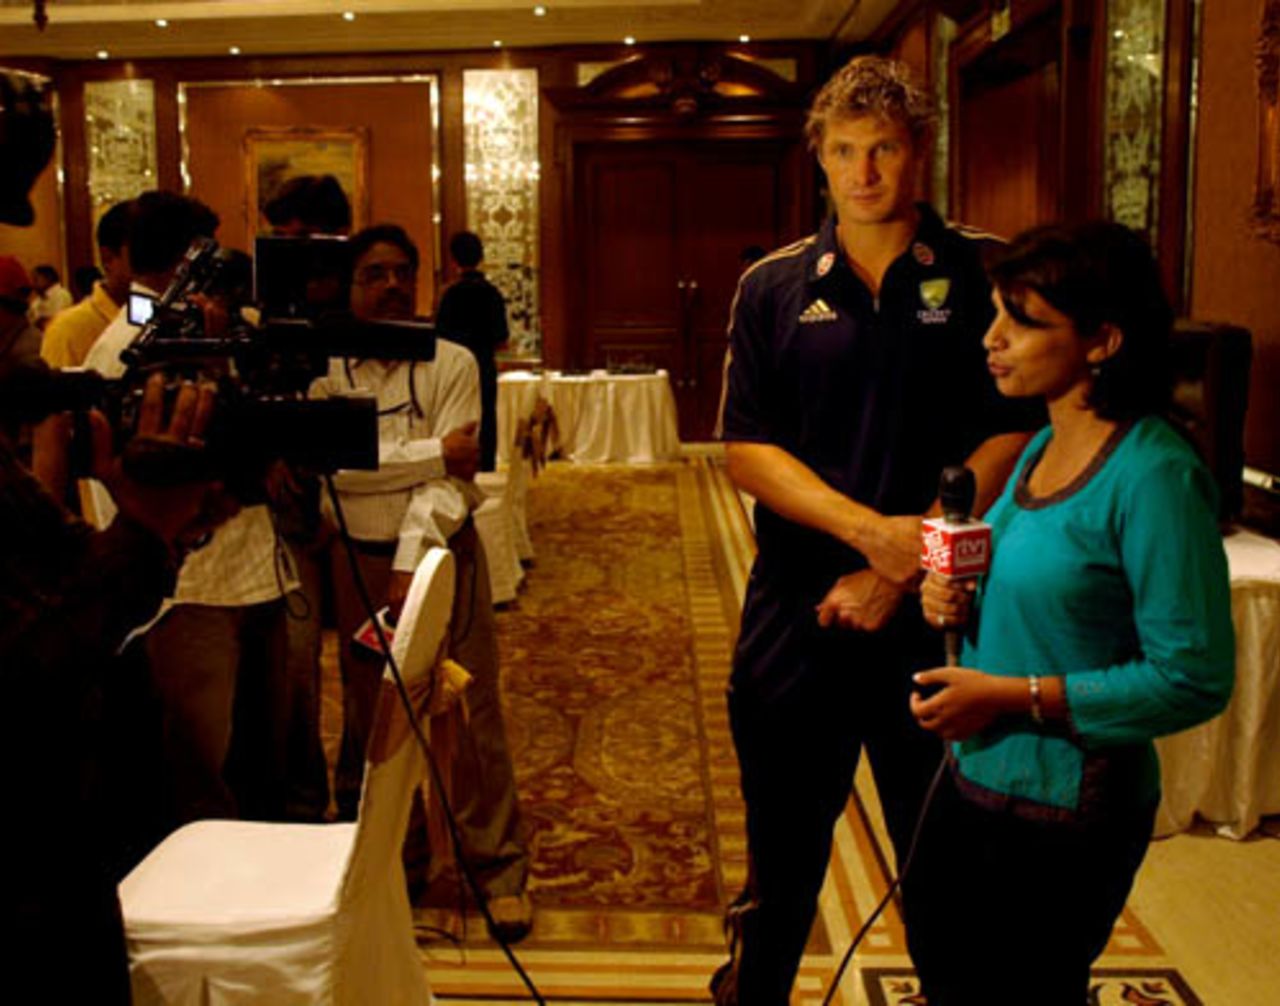 Shane Watson gets interviewed by the Indian media, Hyderabad, September 30, 2008